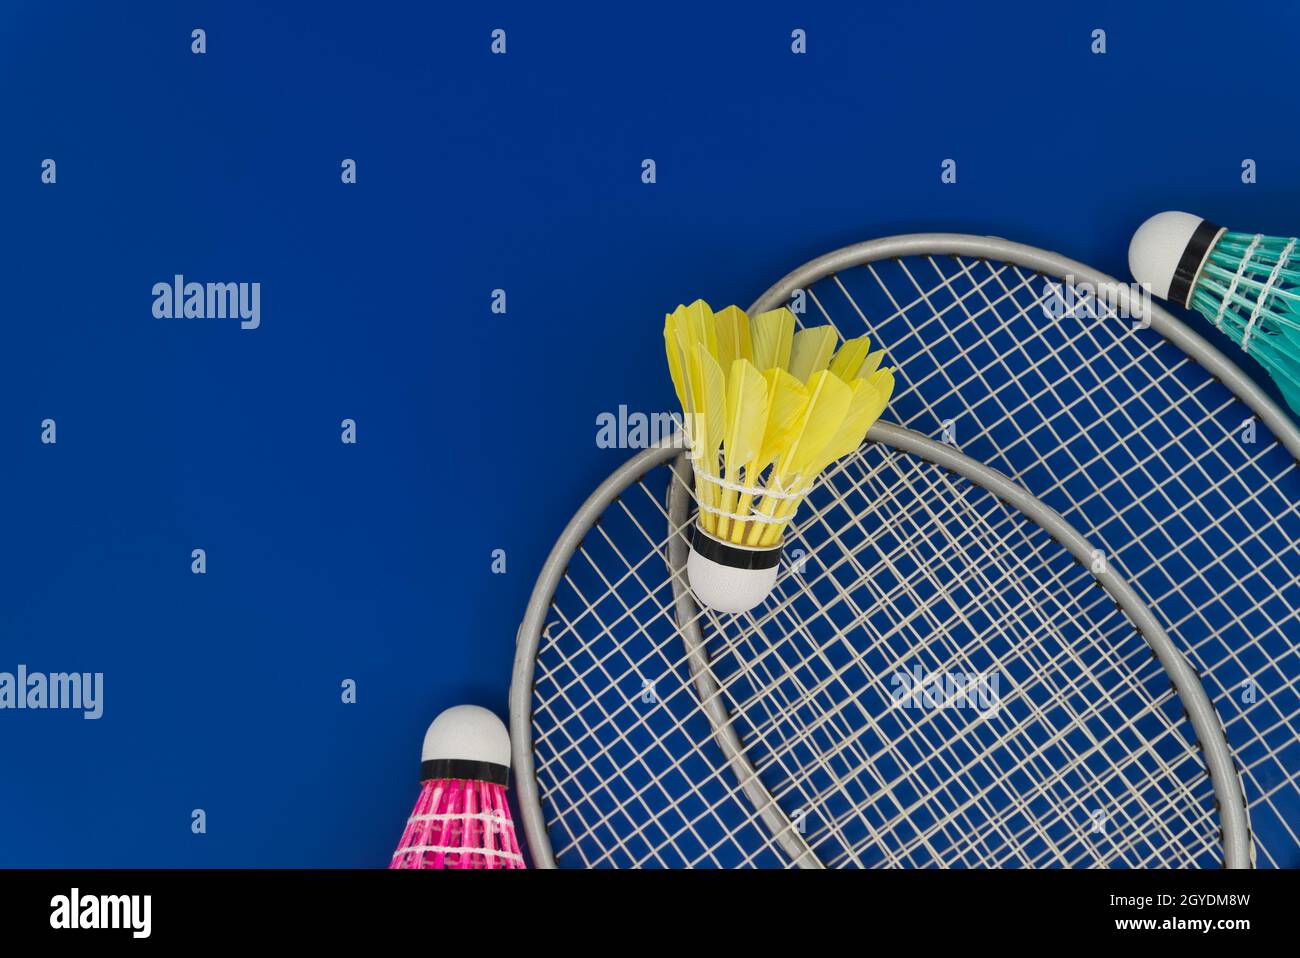 Page 6 - Speed Badminton High Resolution Stock Photography and Images -  Alamy